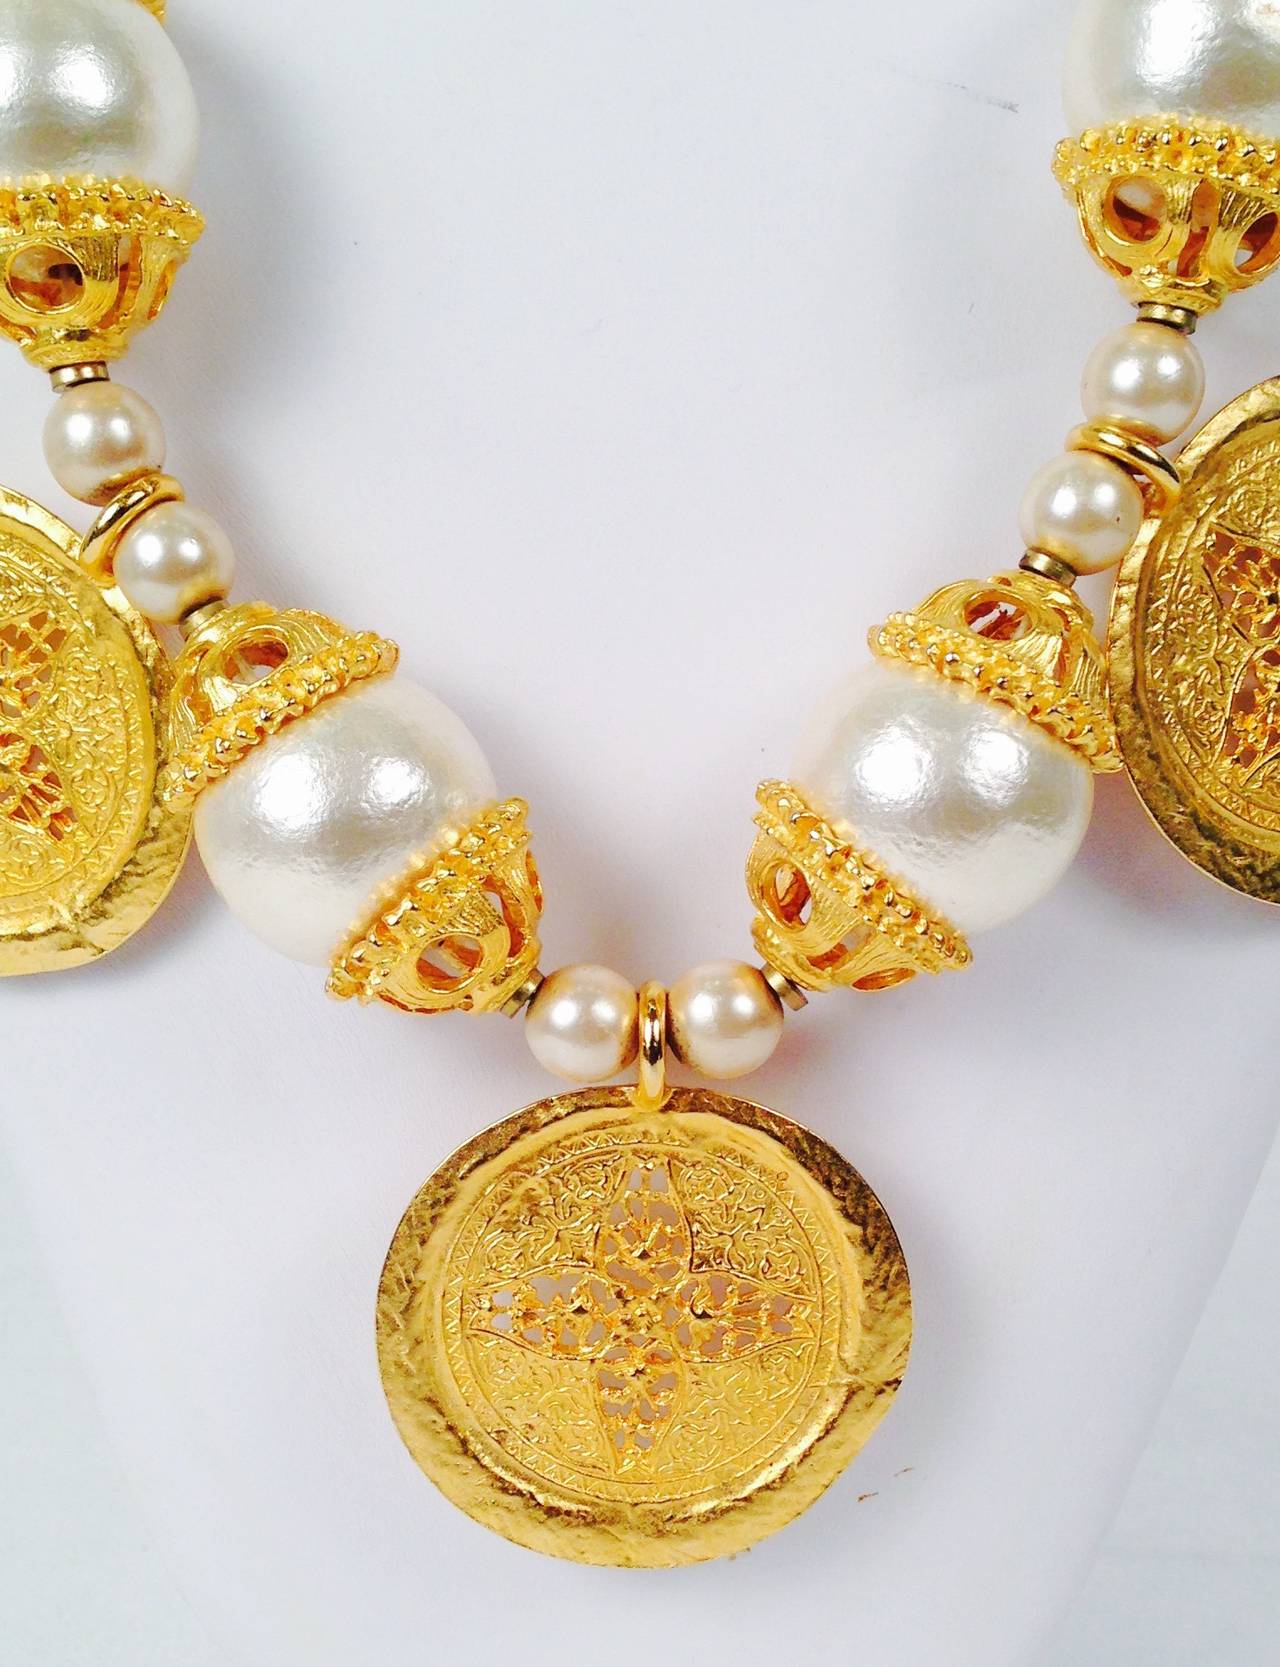 Rare Kenneth Jay Lane Statement Necklace In Excellent Condition For Sale In Palm Beach, FL